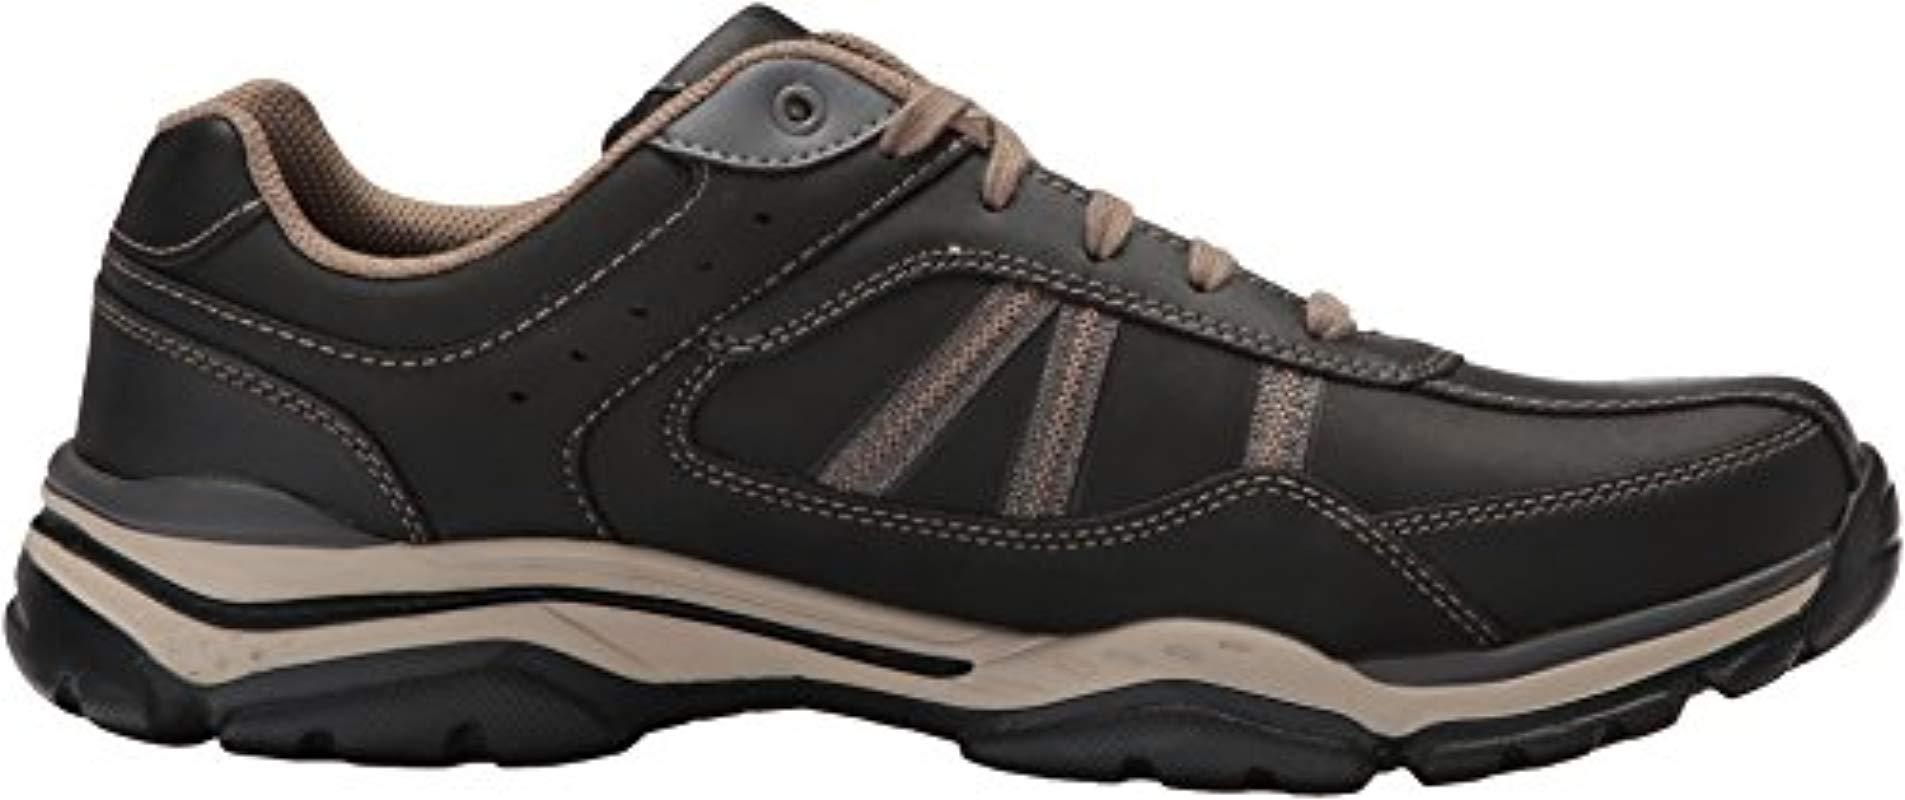 Skechers Relaxed Fit: Braver - Rayland, Black for Men - Save 24% - Lyst